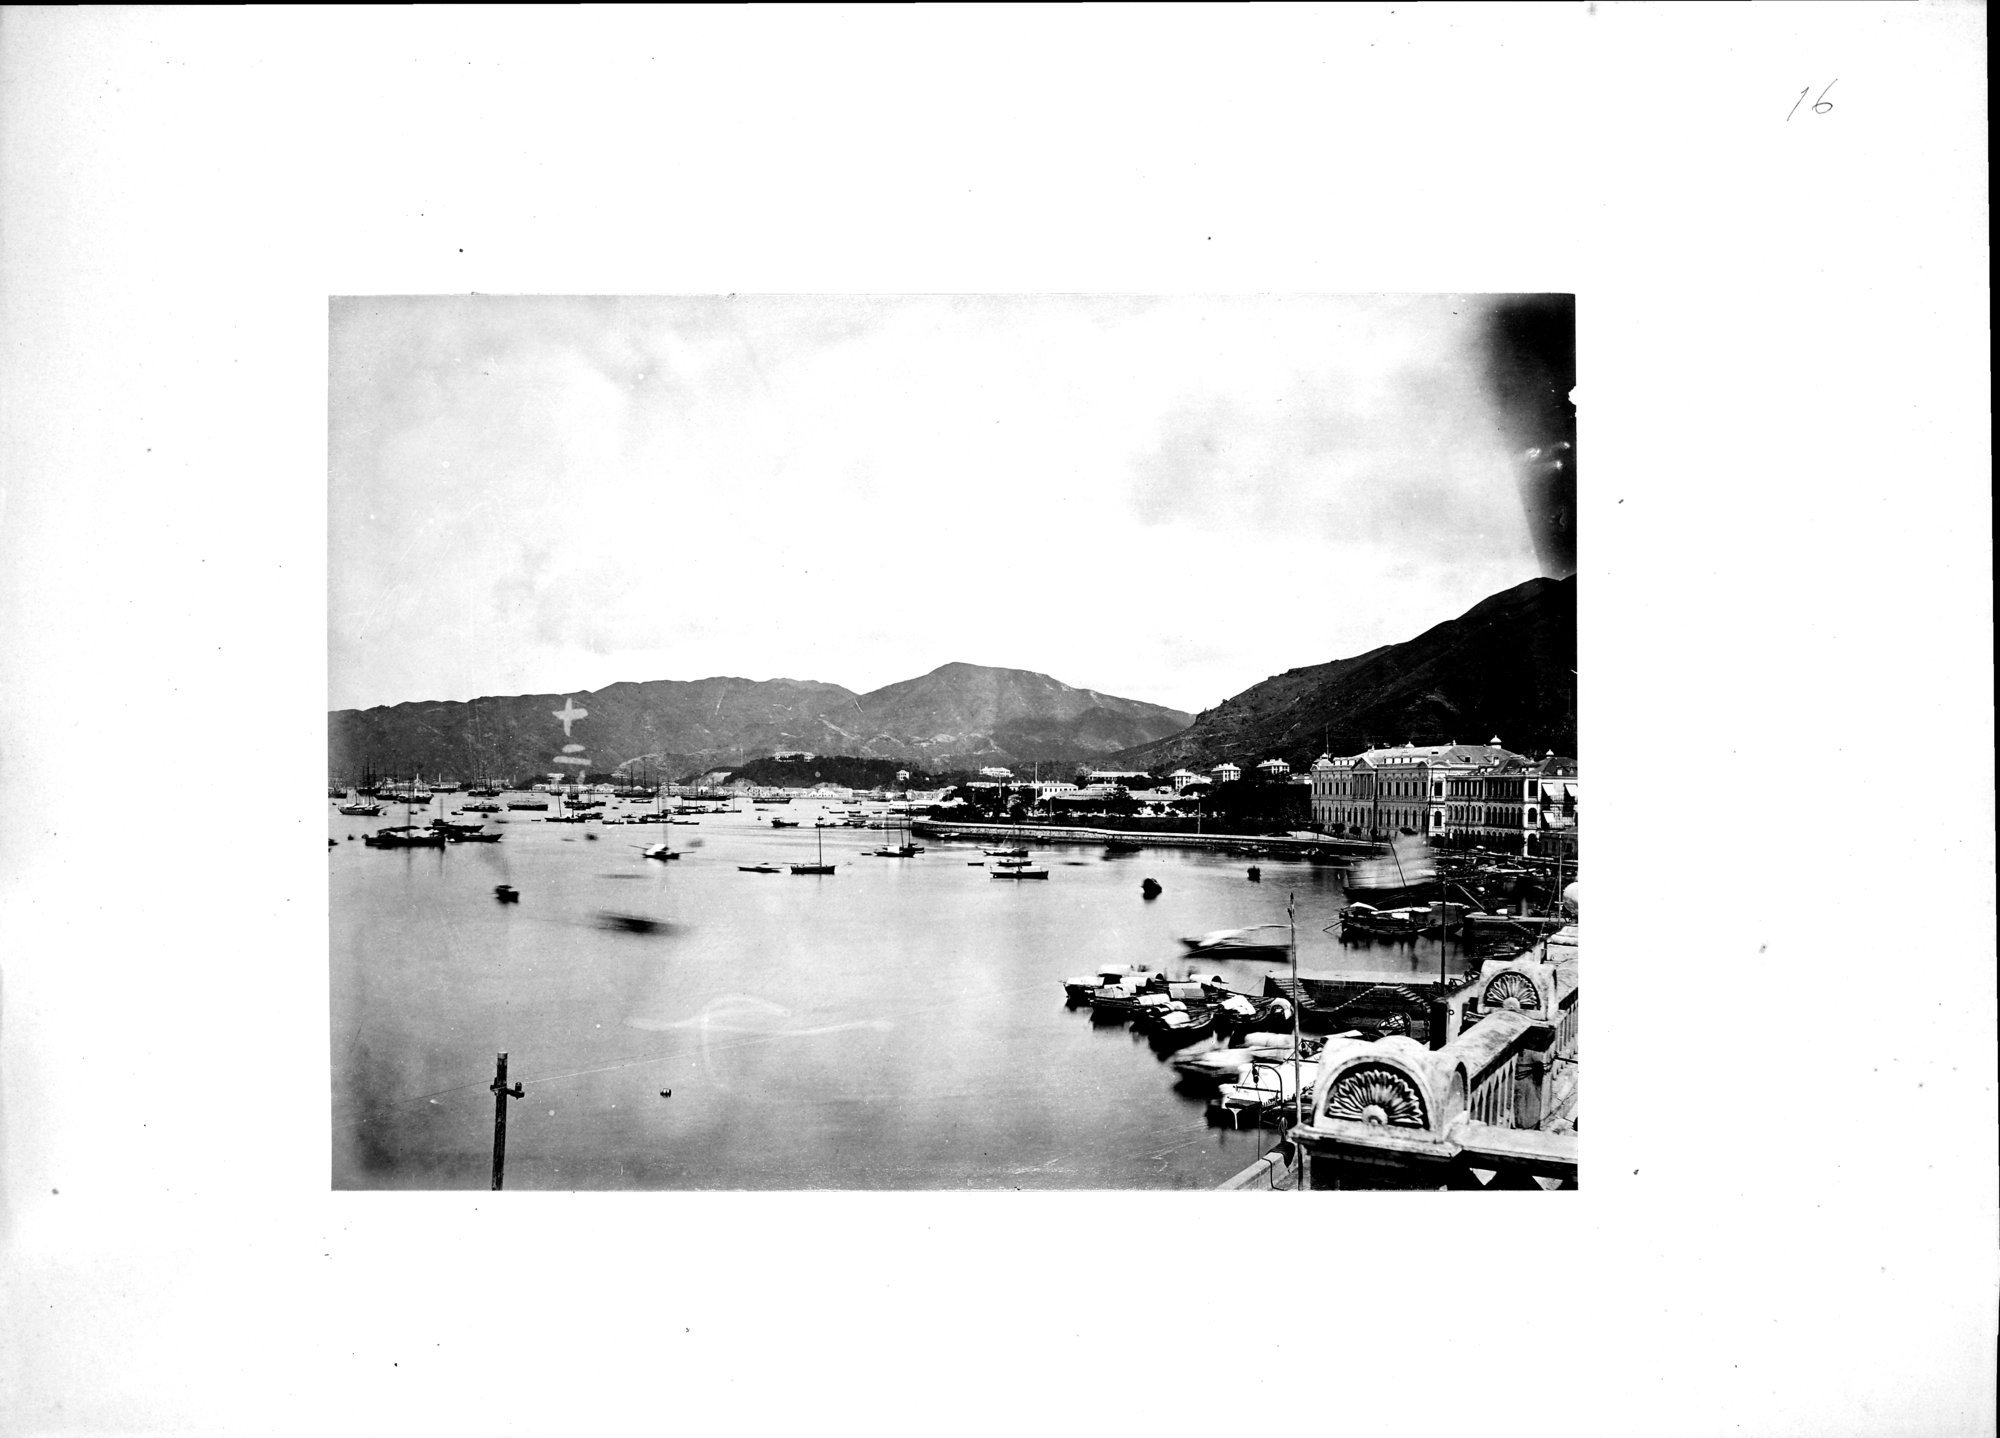 Album of Hongkong Canton Macao Amoy Foochow : vol.1 / Page 18 (Grayscale High Resolution Image)